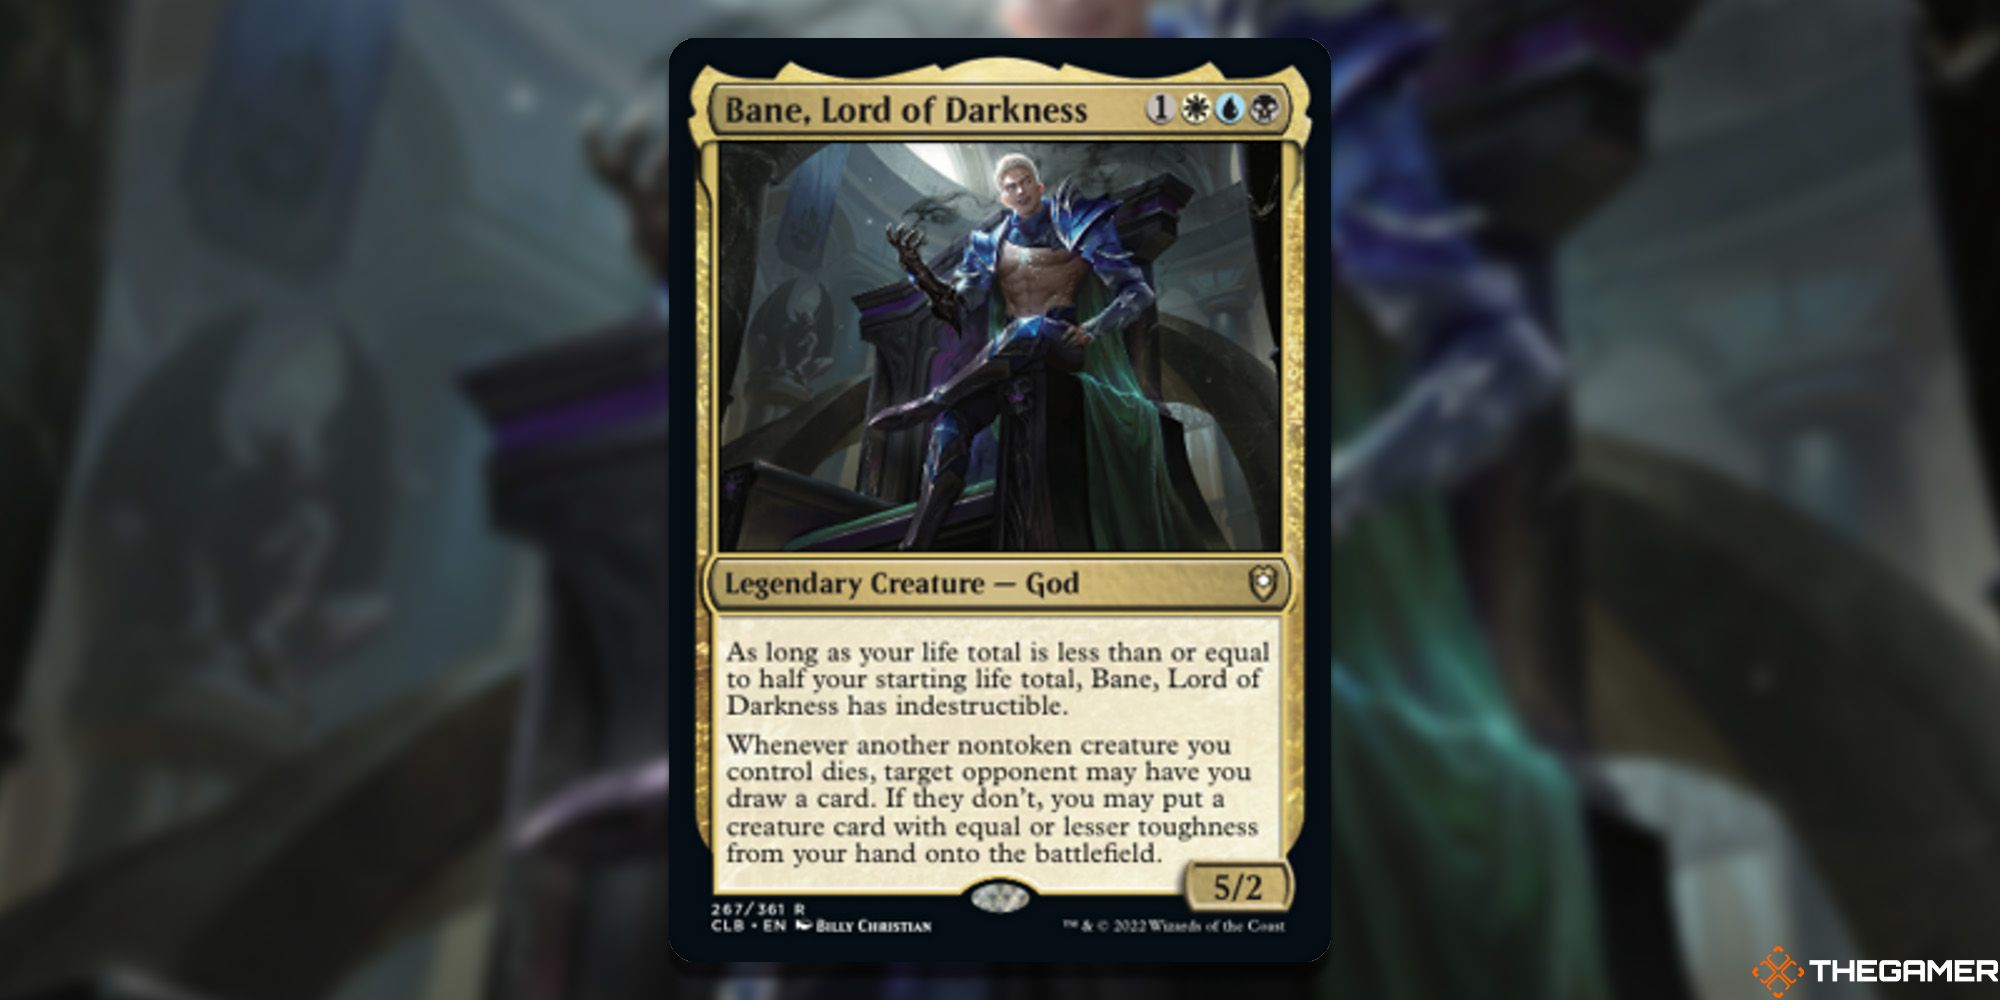 Image of the Bane, Lord of Darkness card in Magic: The Gathering, with art by Billy Christian